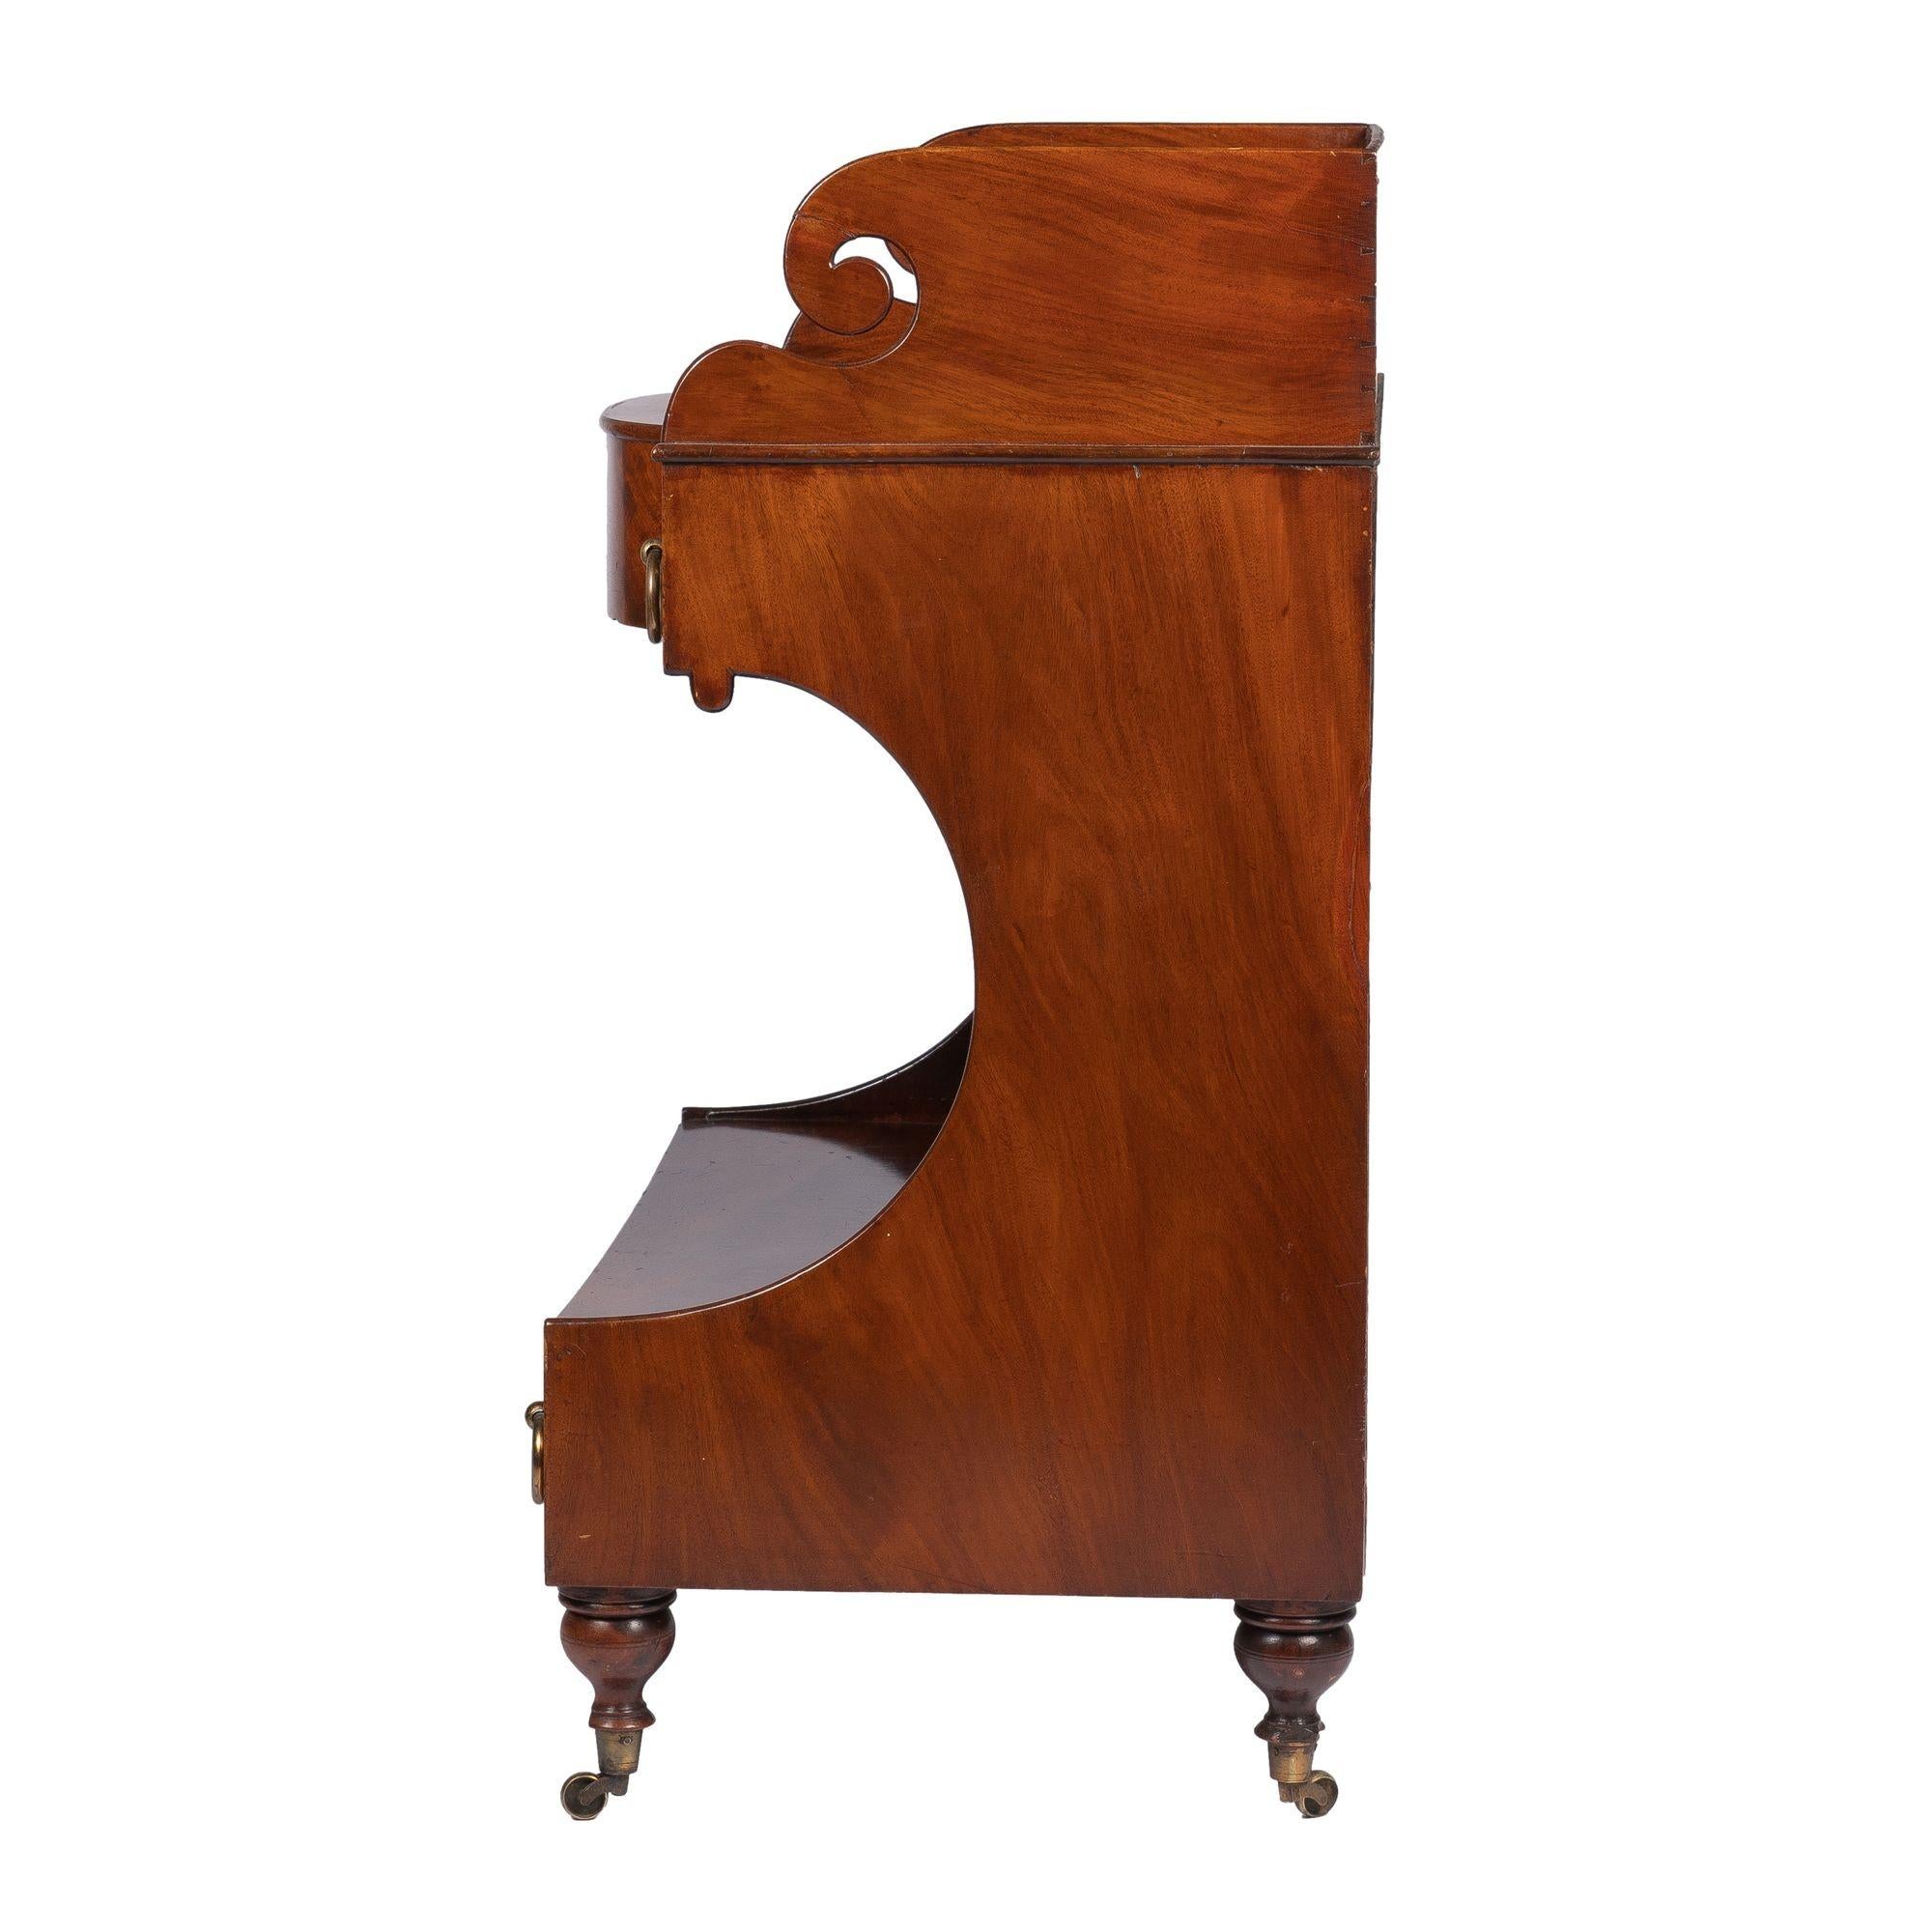 American neoclassic dressing stand / wash stand with projecting demilune top, framed on three sides with a splash. The top rests on a conforming apron fitted with flanking apron drawers accompanied by drop ring brass pulls, and is supported by an